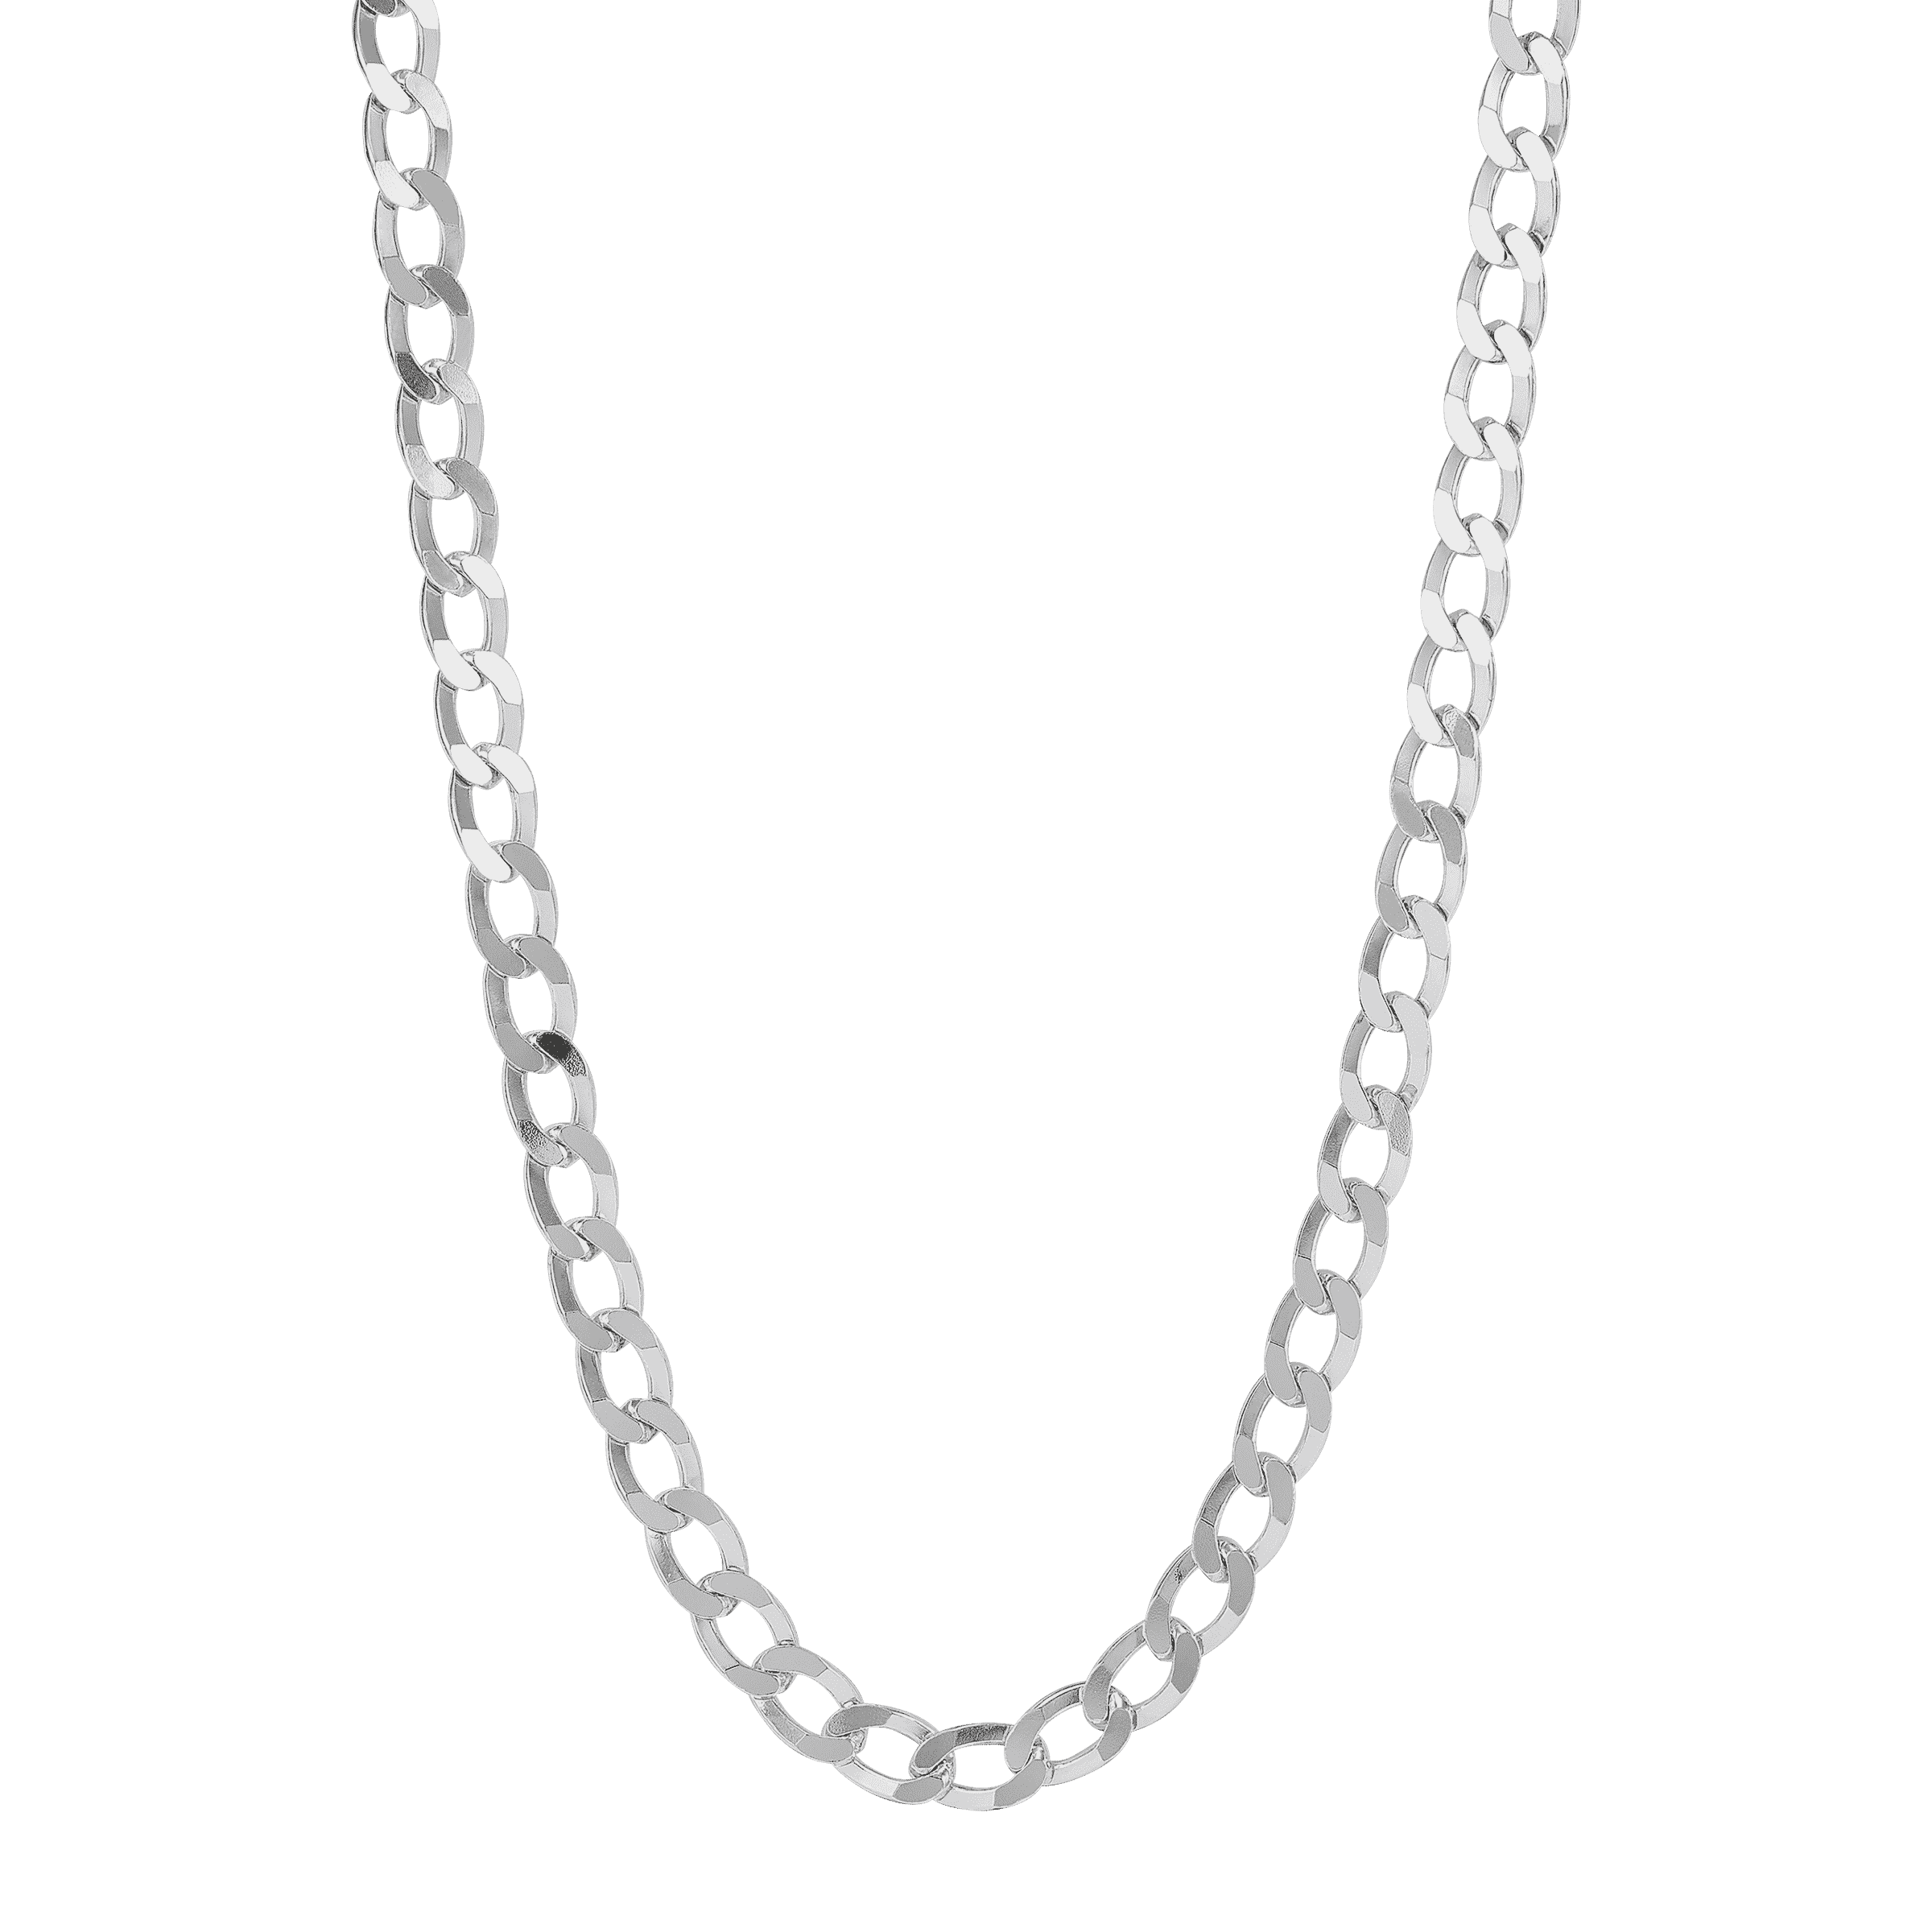 Silpada 'Everyday Effortless' Chain Necklace In Sterling Silver, 18